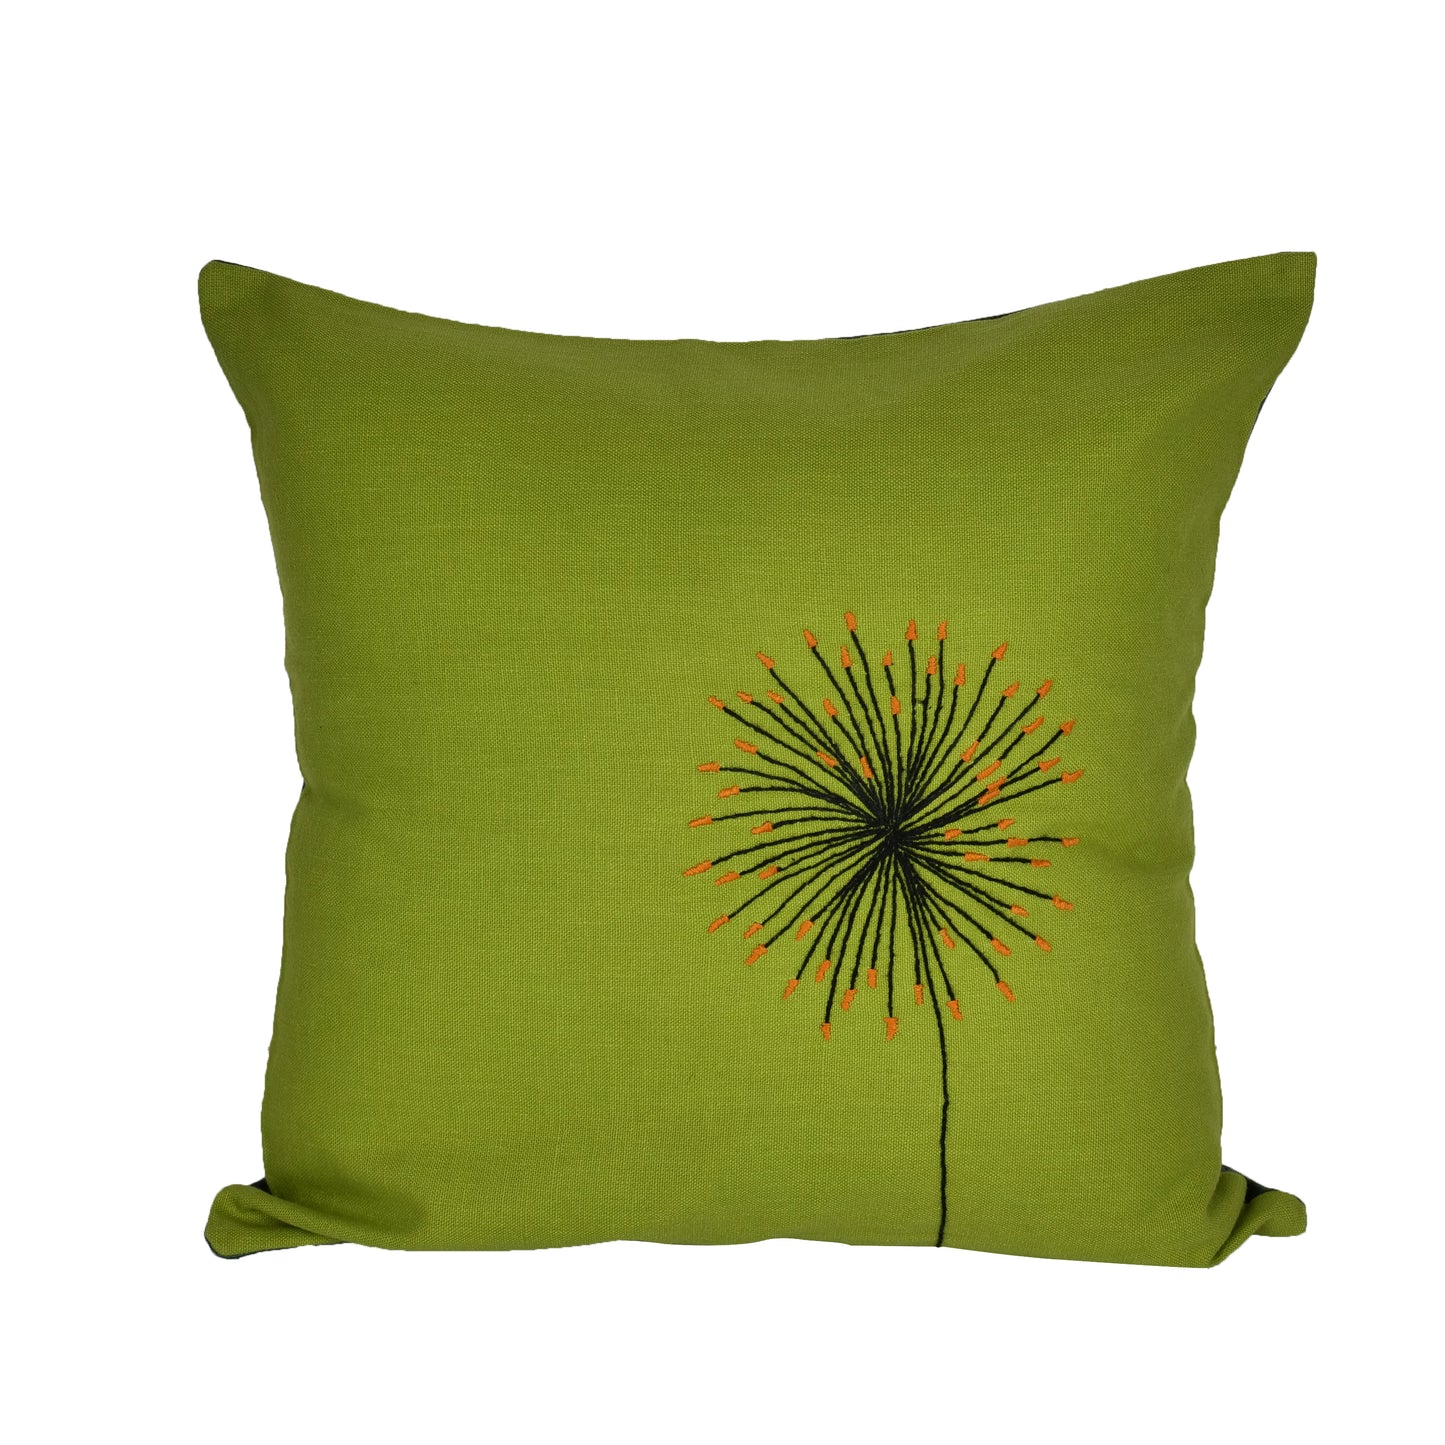 'A Breezy Aura' Hand Embroidered Linen Cushion Covers (16 x 16 Inch)